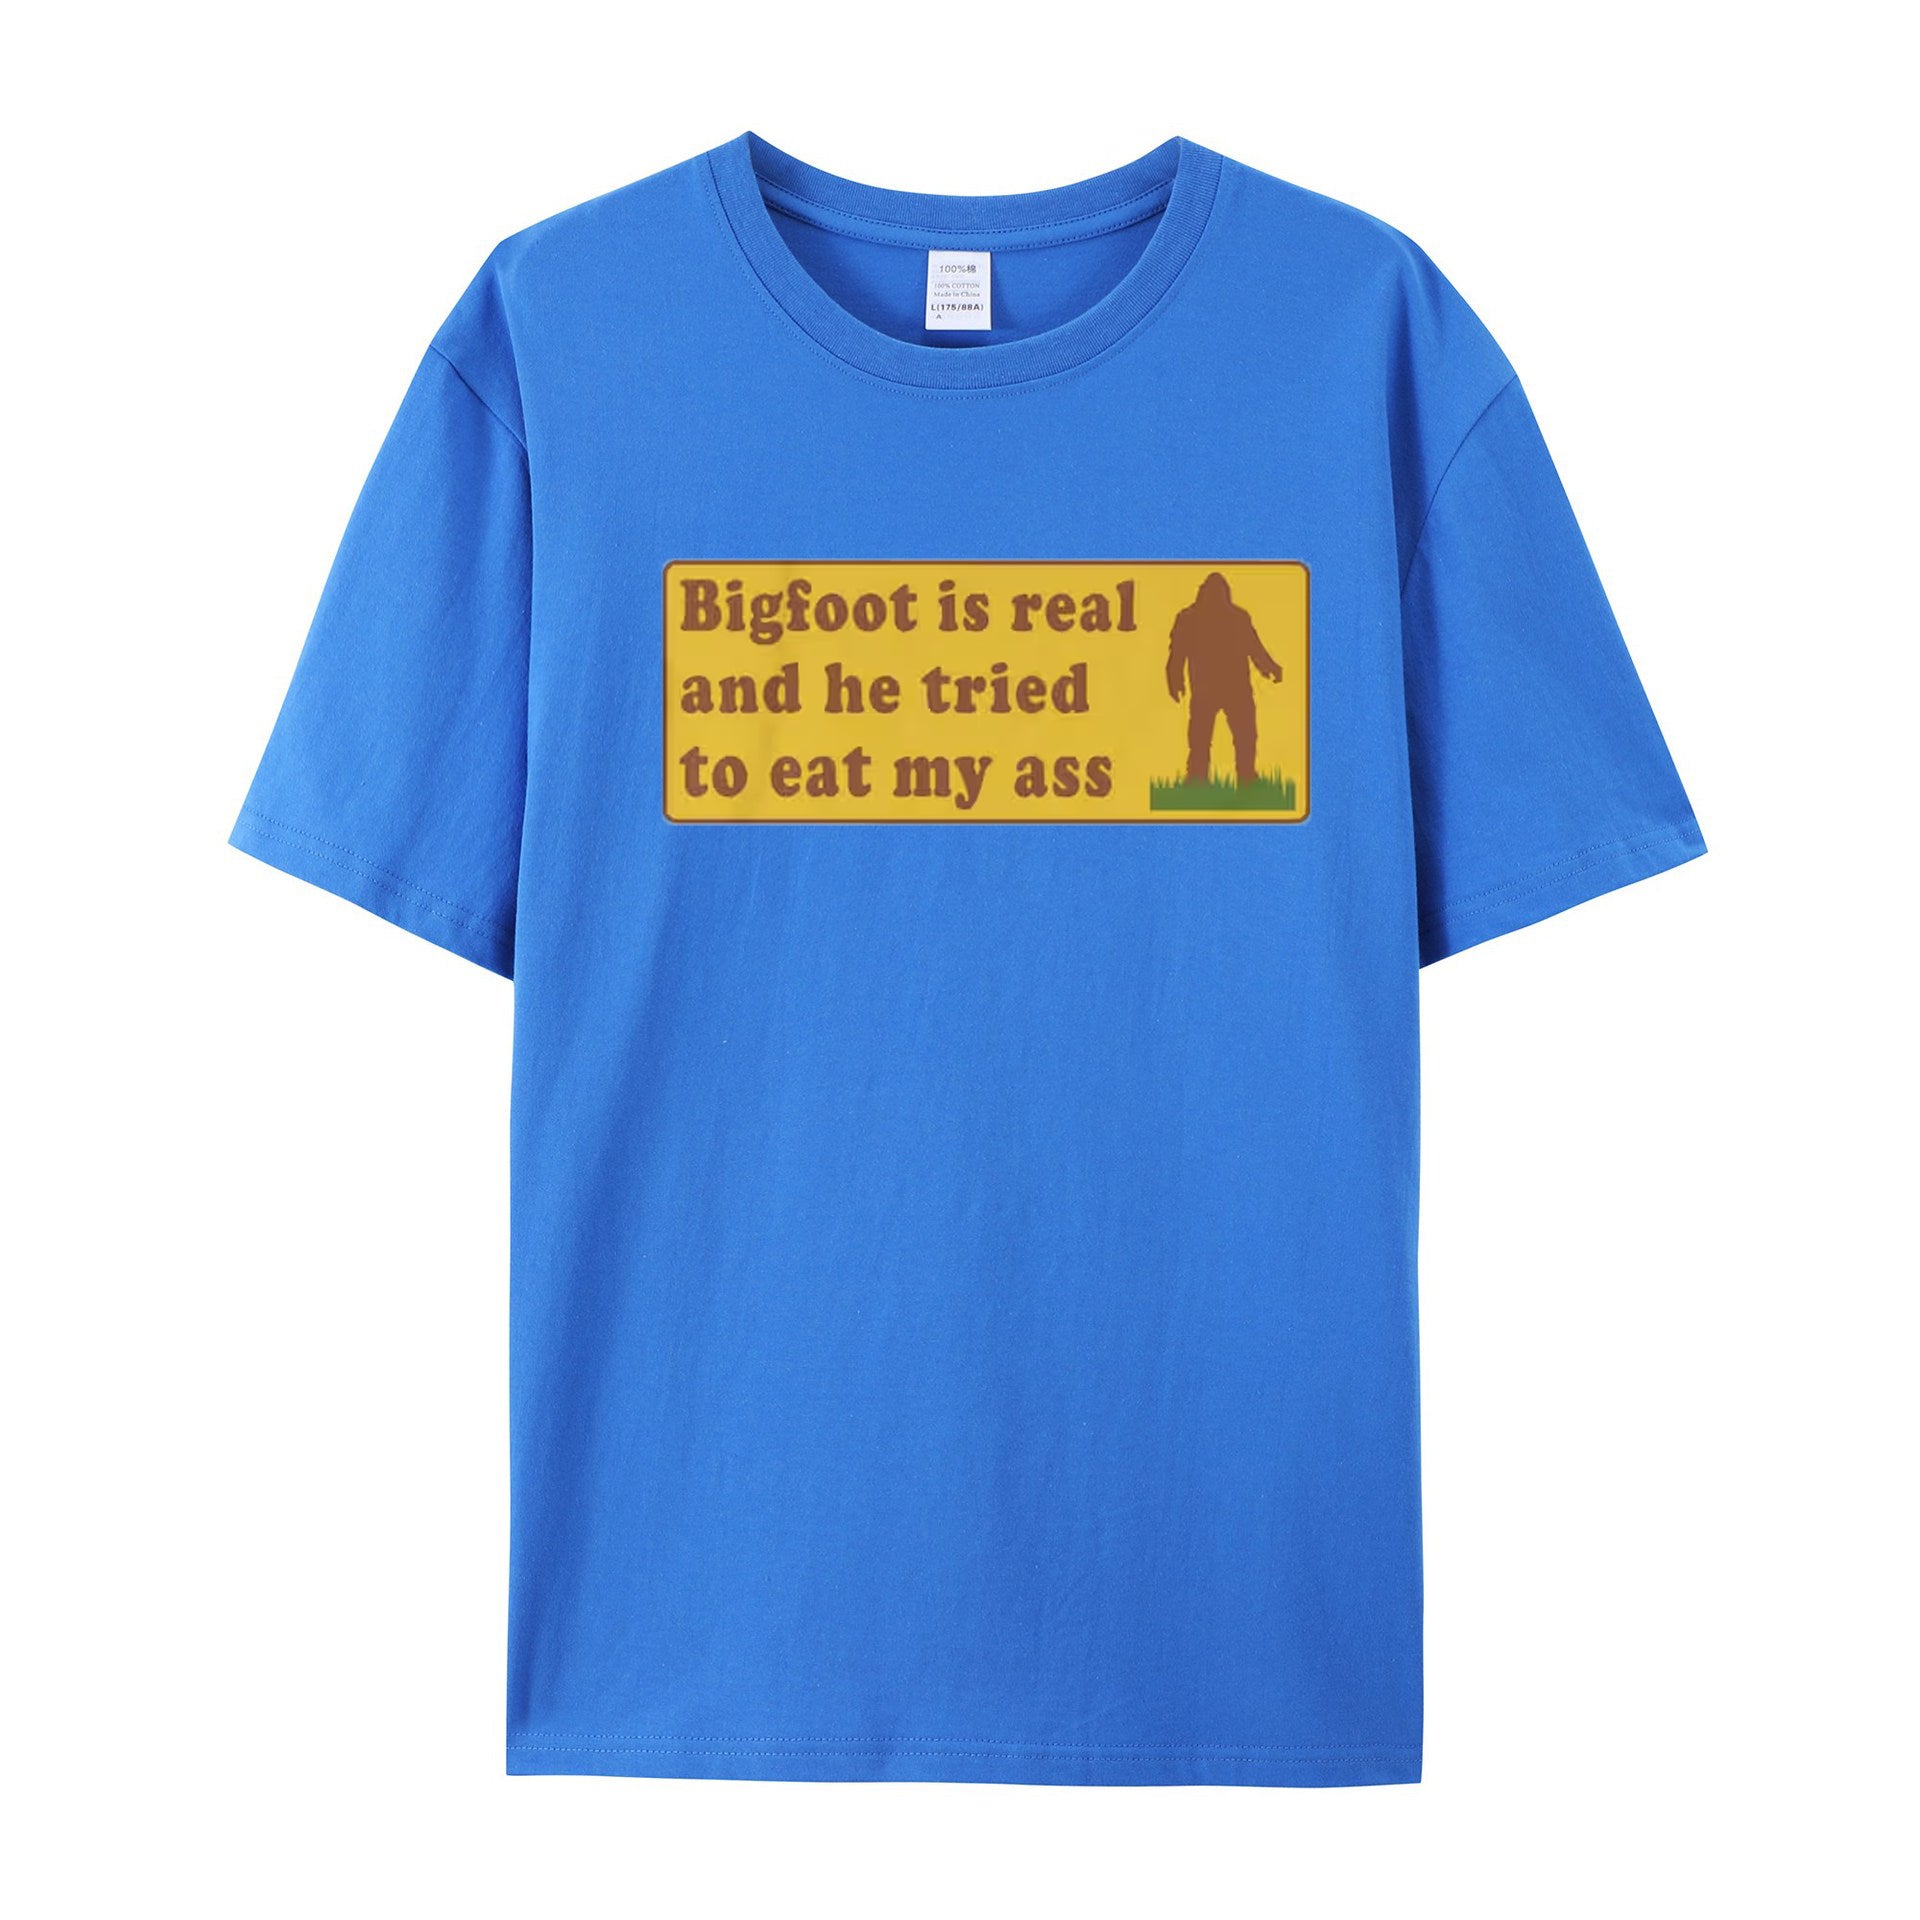 Funny Meme TShirt, Bigfoot Is Real And He Tried To Eat My Ass Funny Oddly Specific Joke Tee, Gift Shirt - Shapelys